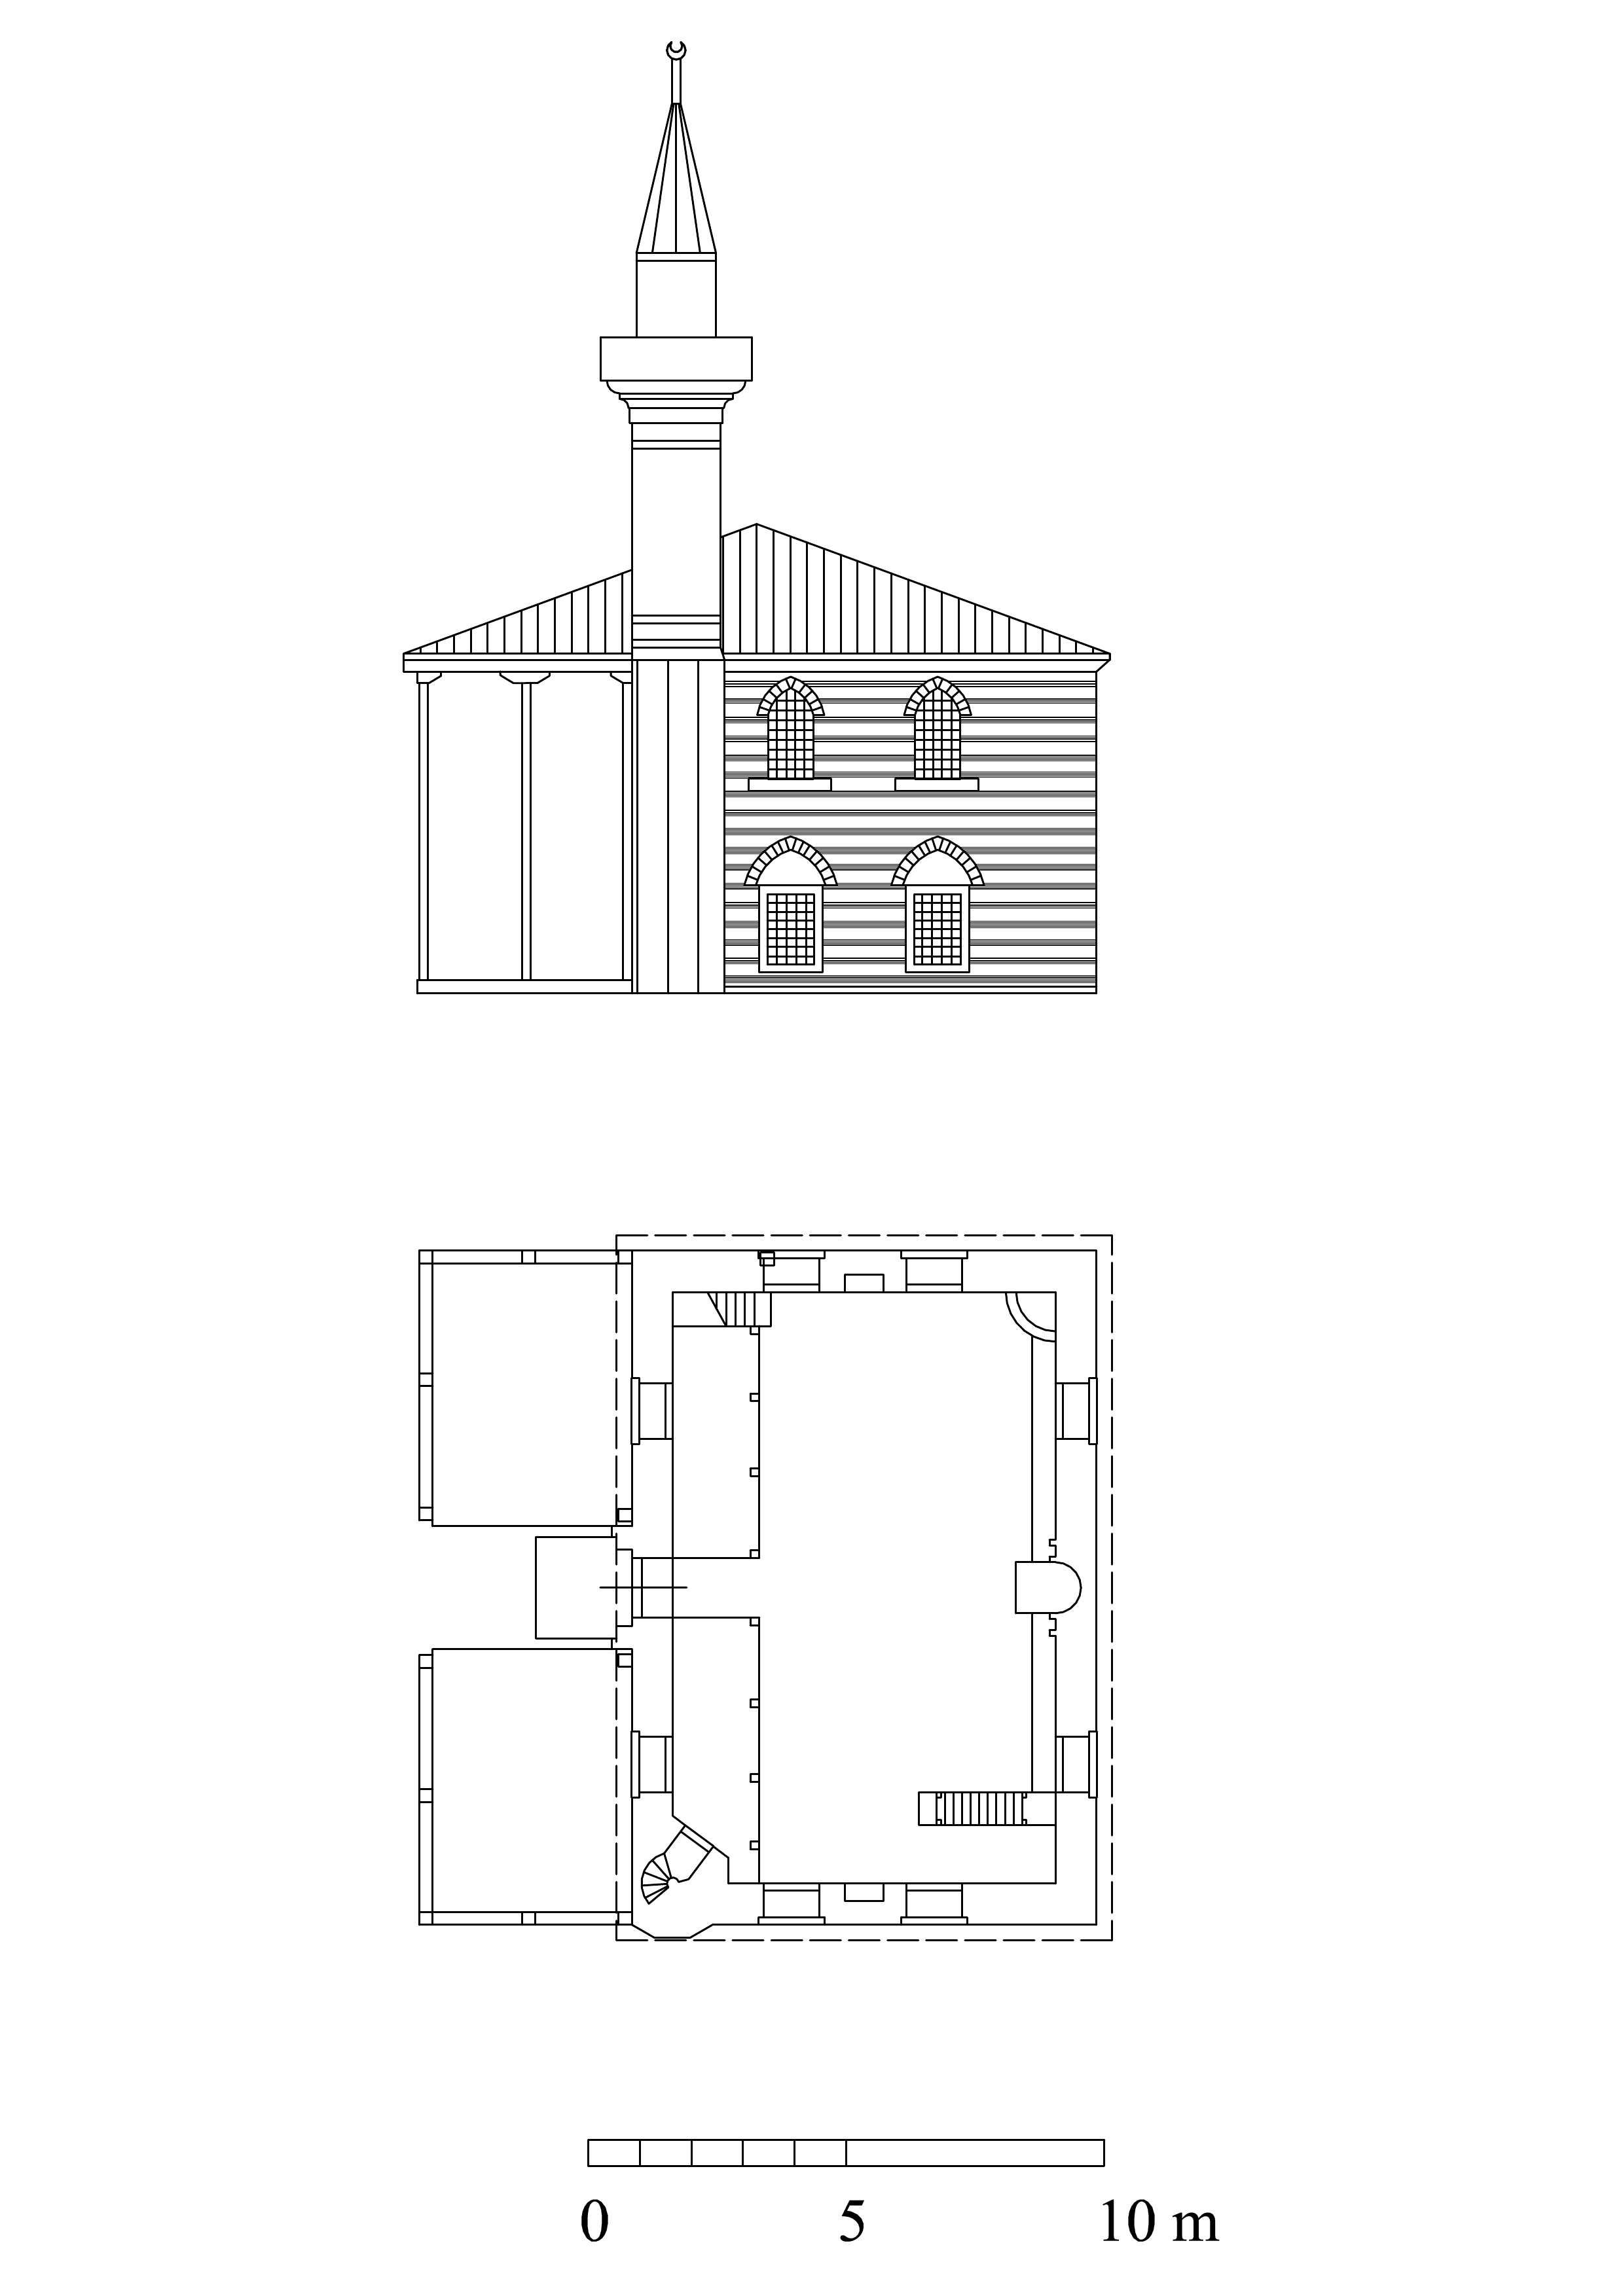 Hürrem Çavuş Camii - Floor plan and elevation with hypothetical reconstruction of portico. DWG file in AutoCAD 2000 format. Click the download button to download a zipped file containing the .dwg file.